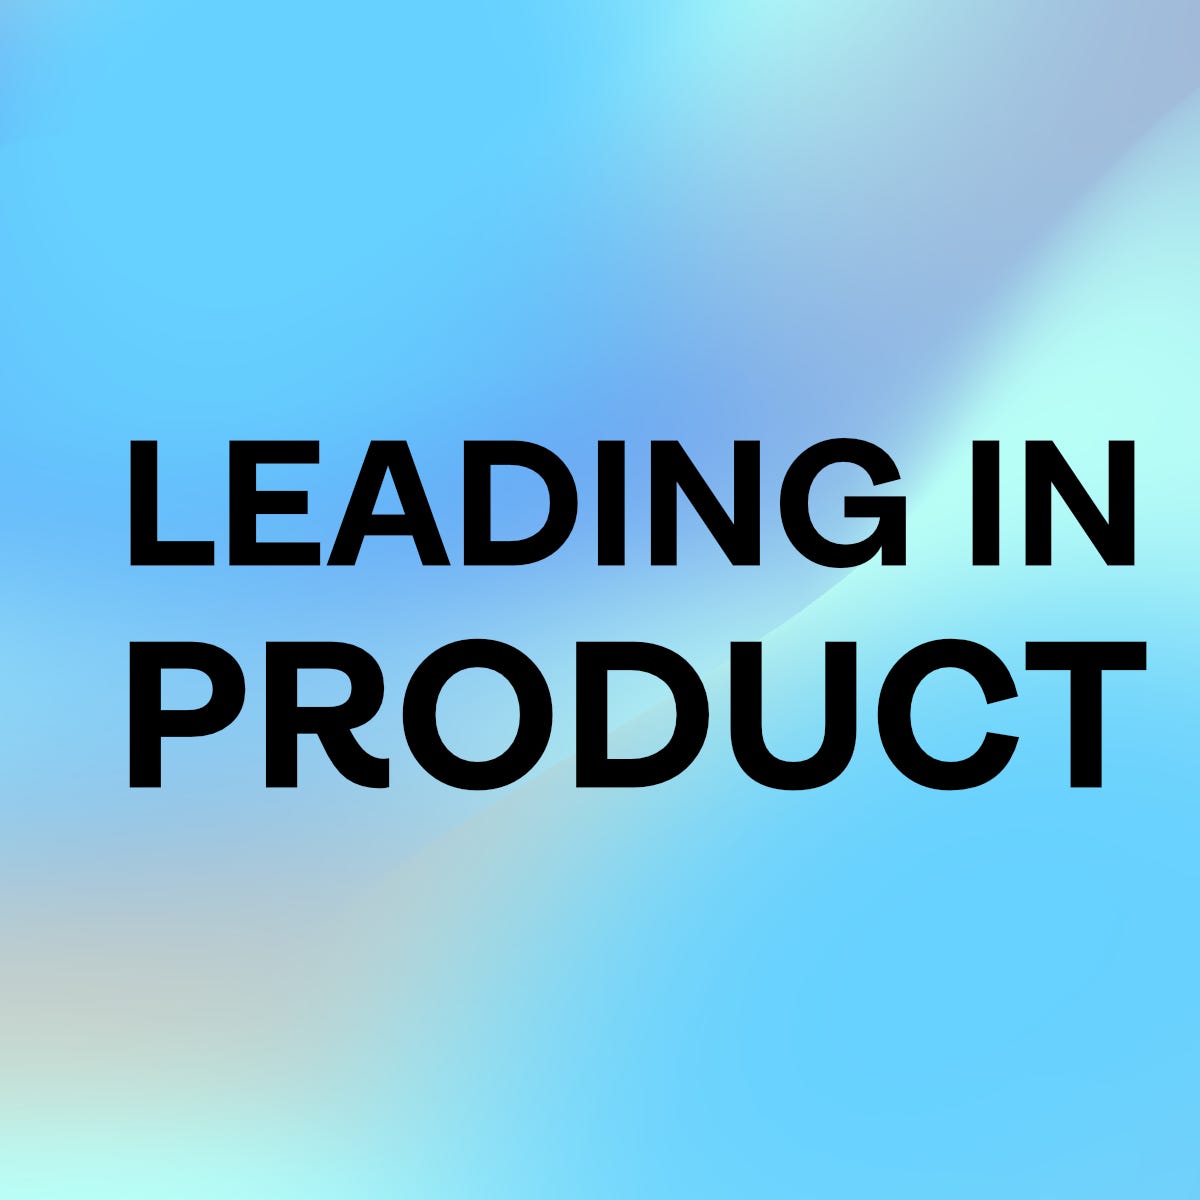 Leading in Product